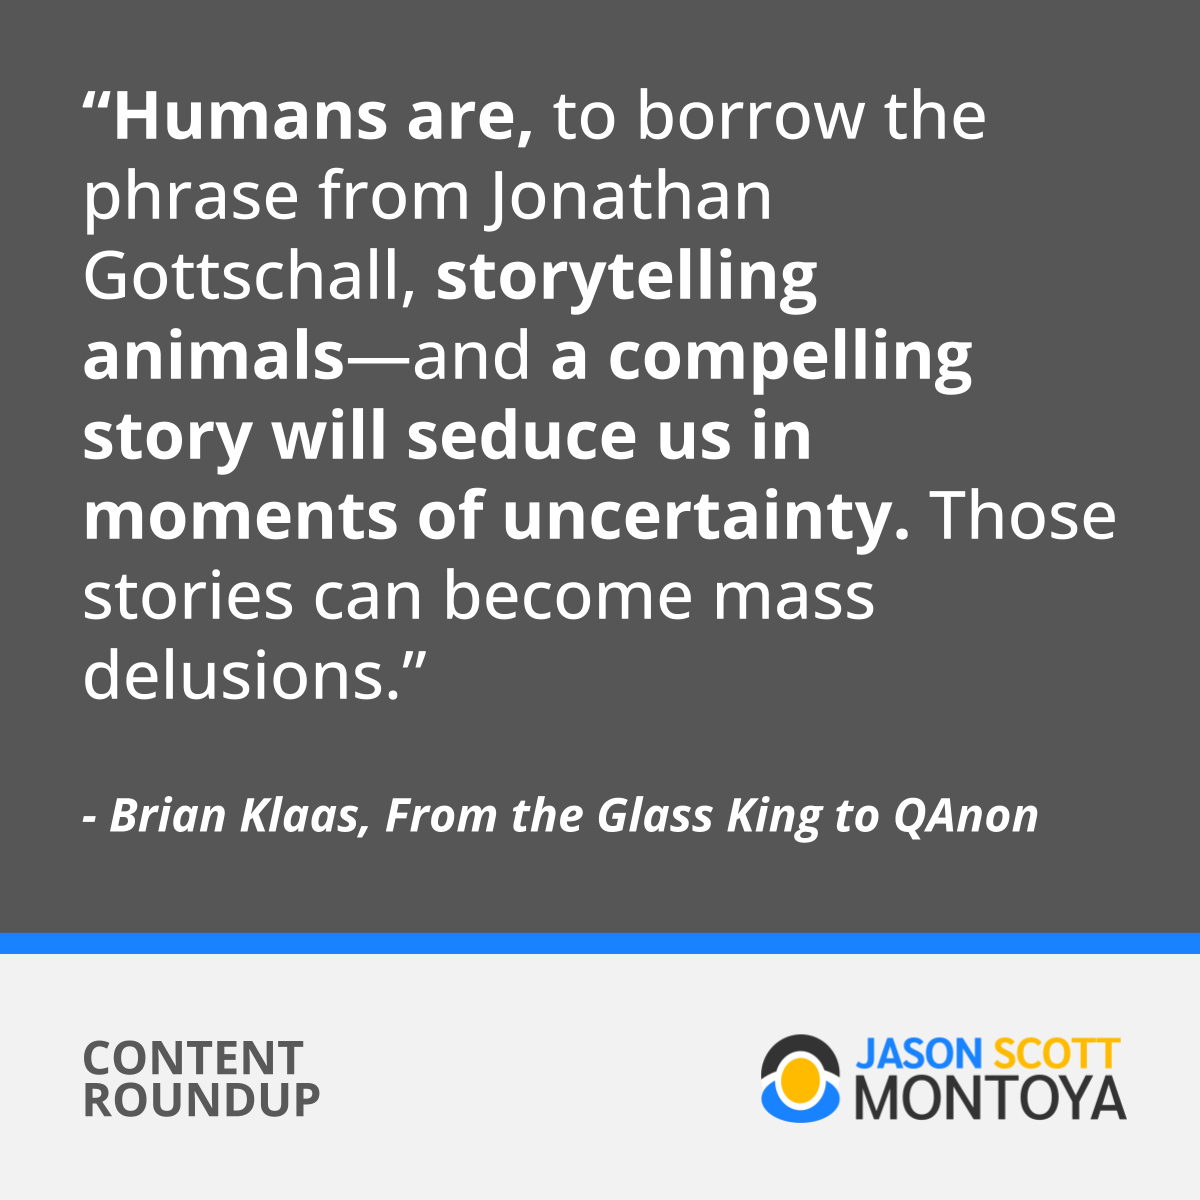 “Humans are, to borrow the phrase from Jonathan Gottschall, storytelling animals—and a compelling story will seduce us in moments of uncertainty. Those stories can become mass delusions.”  - Brian Klaas, From the Glass King to QAnon